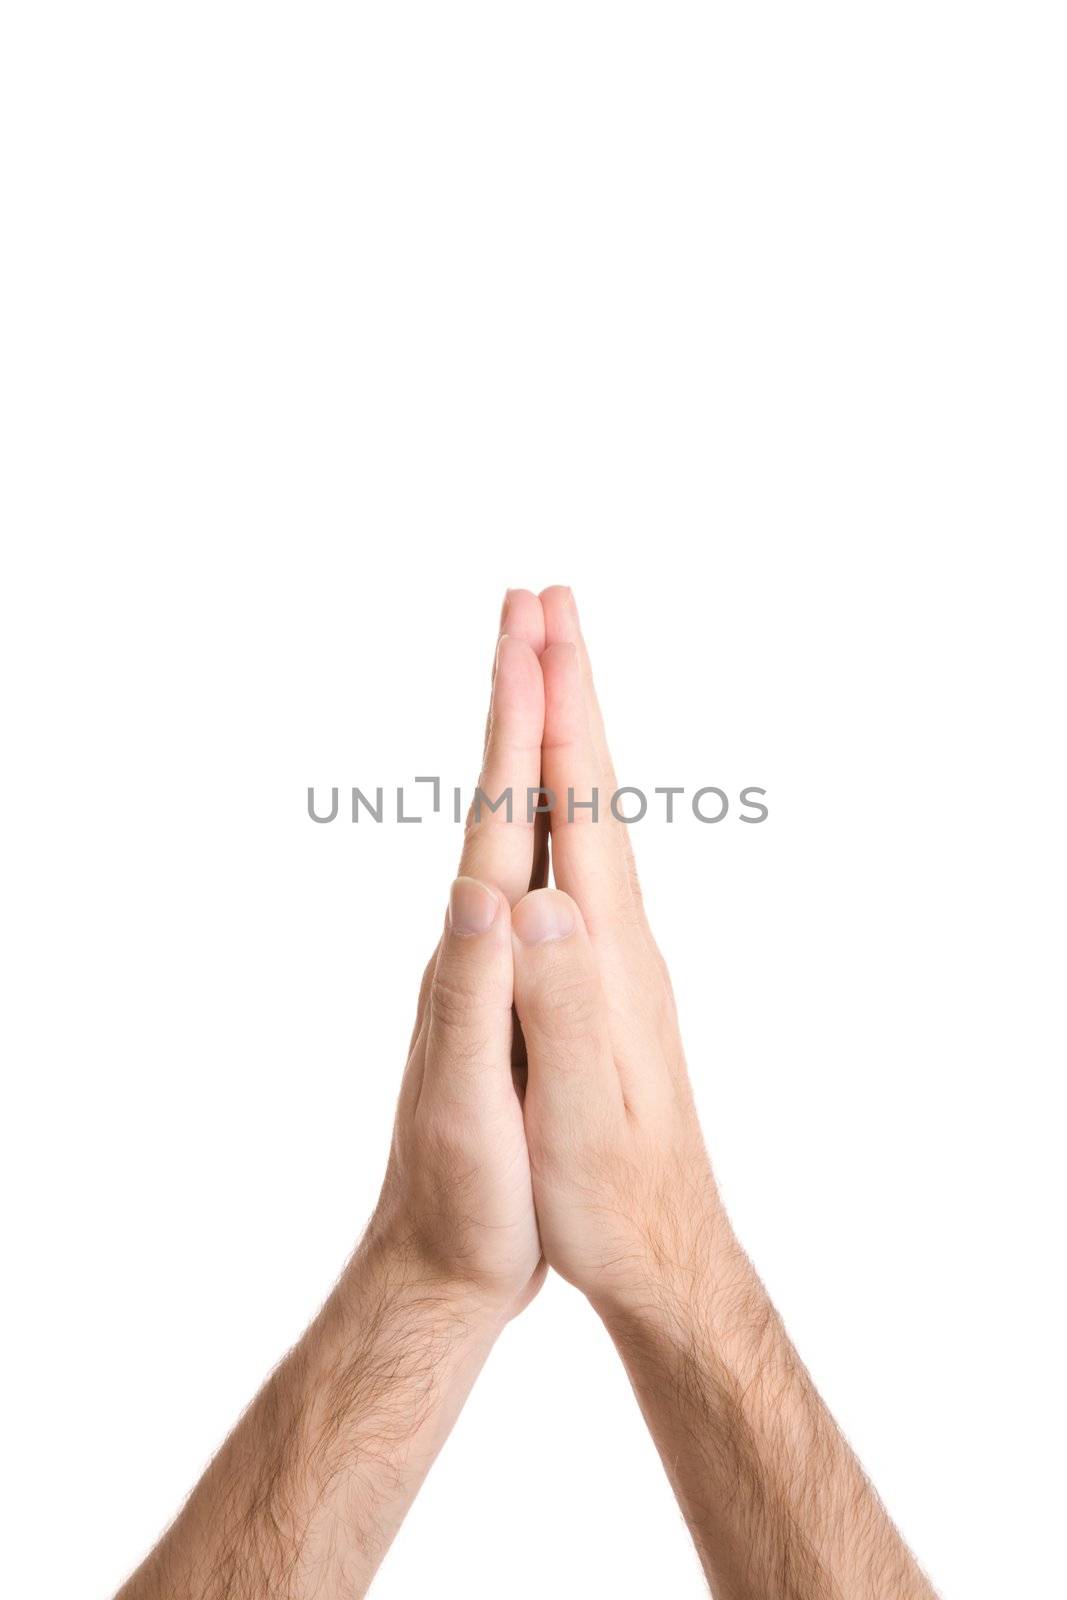 religion concept, isolated on white background, focus point on hands